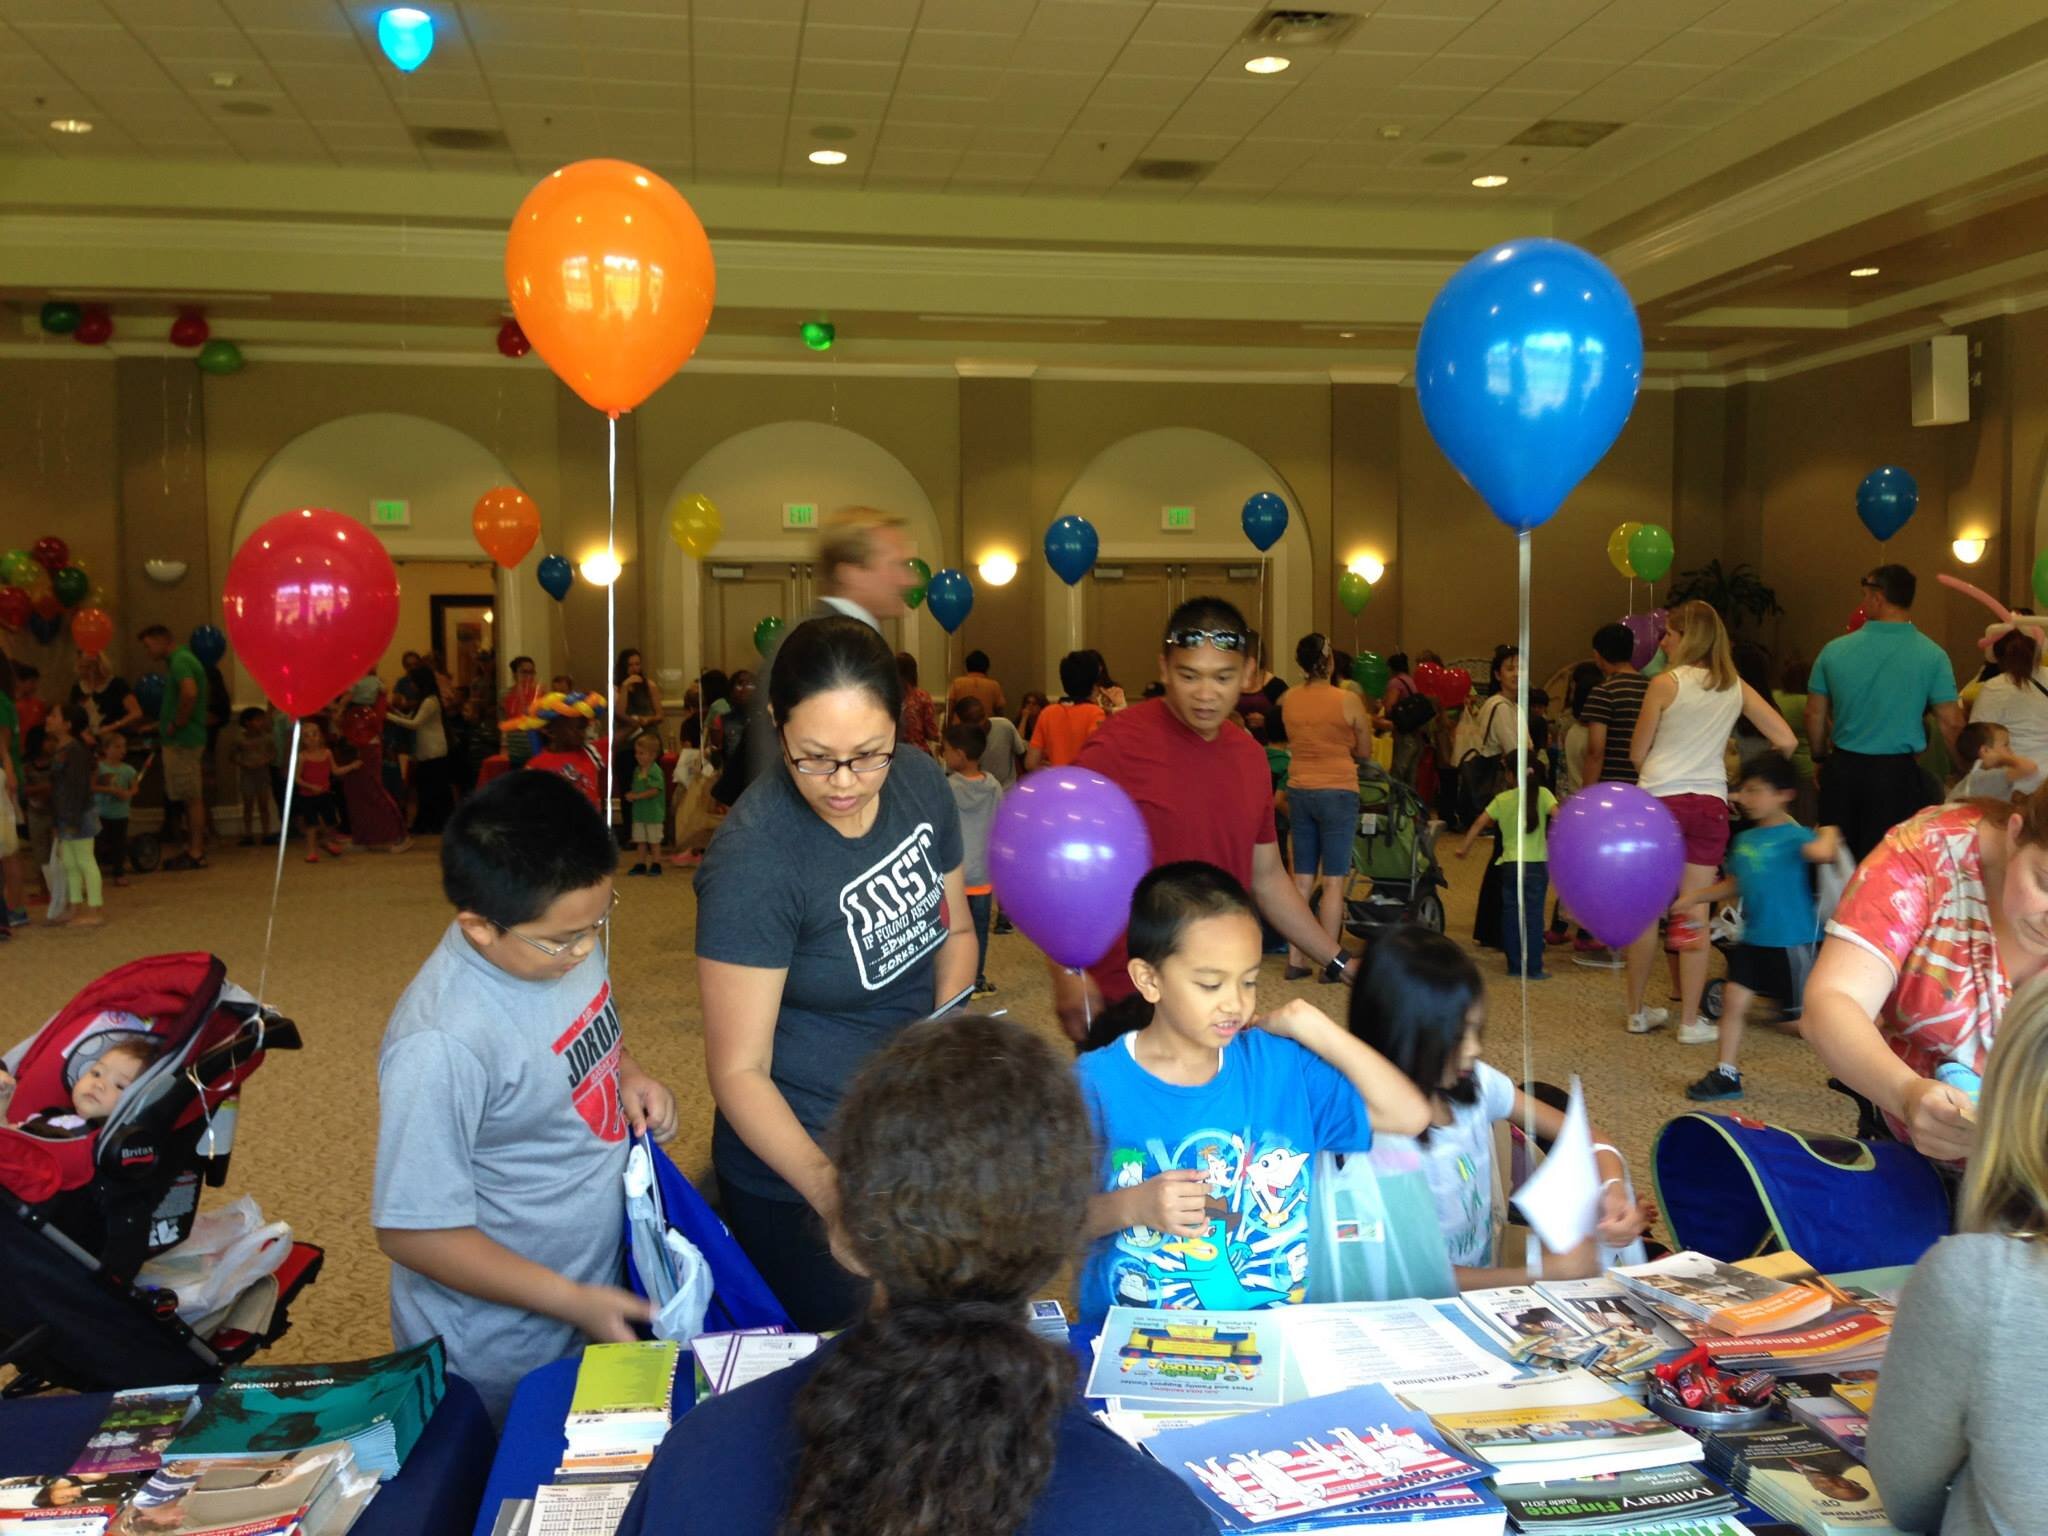 Residents browse local attractions at our community engagement event.